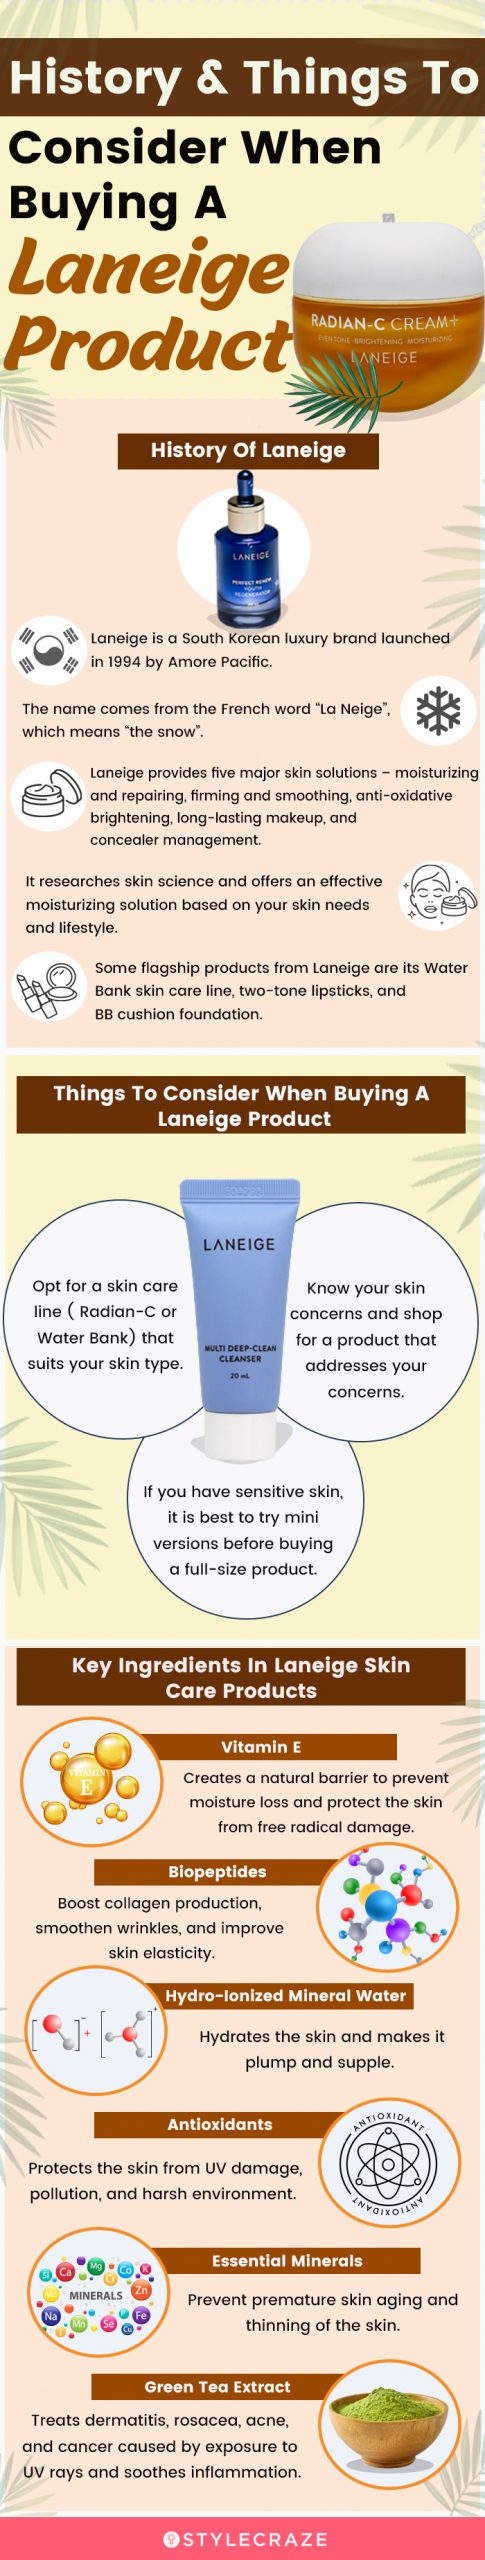 History & Things To Consider When Buying A Laneige Product [infographic]